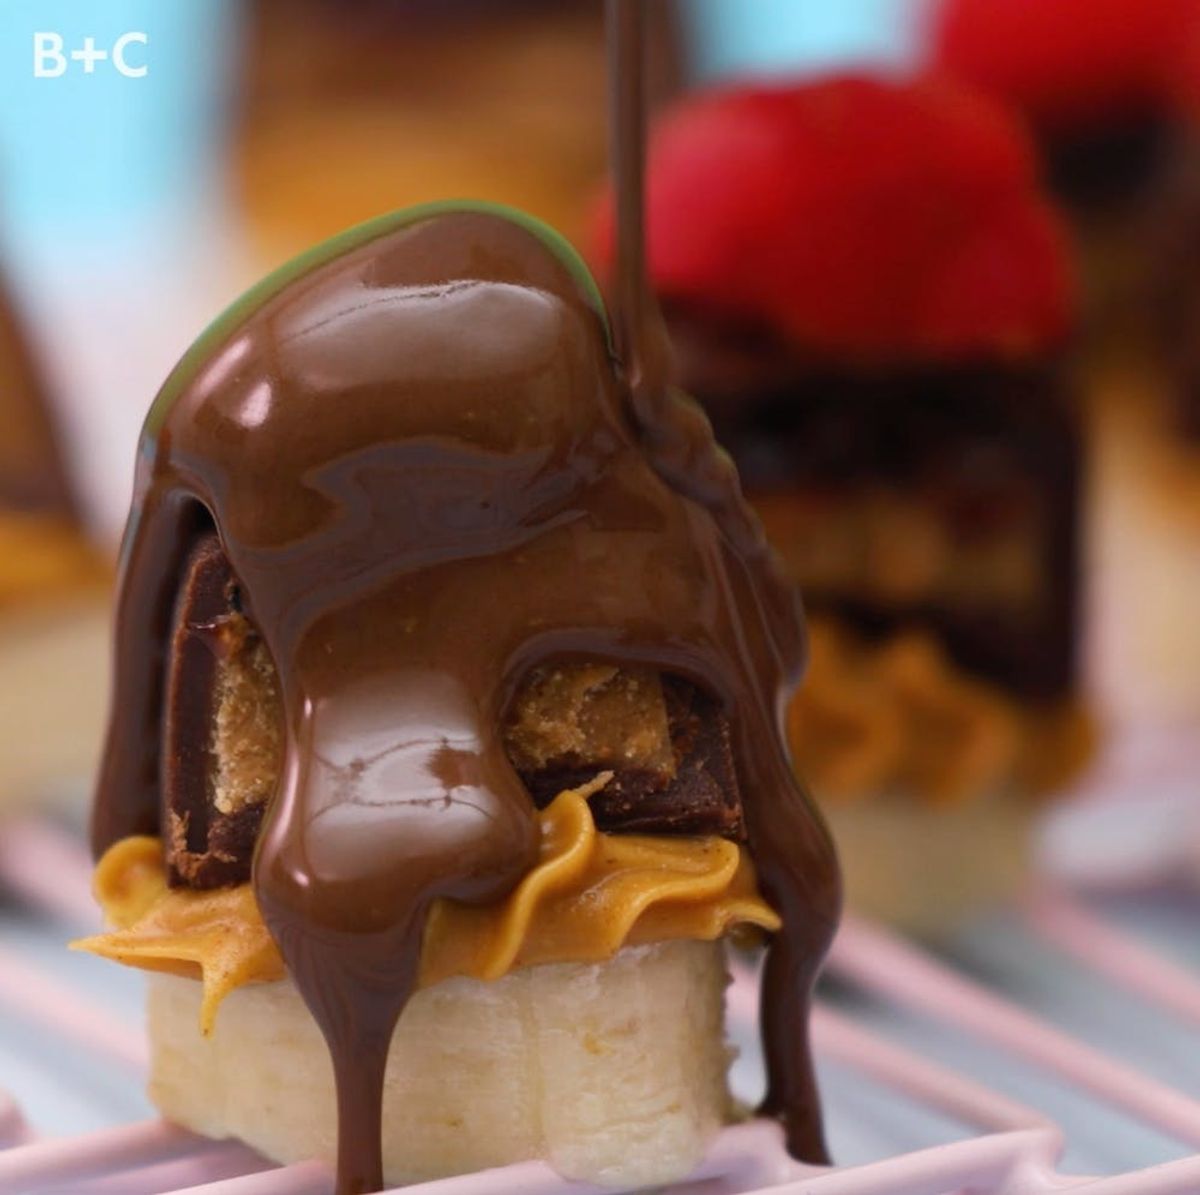 Try These Chocolate PB+J Banana Bites for a Chill Summer Treat